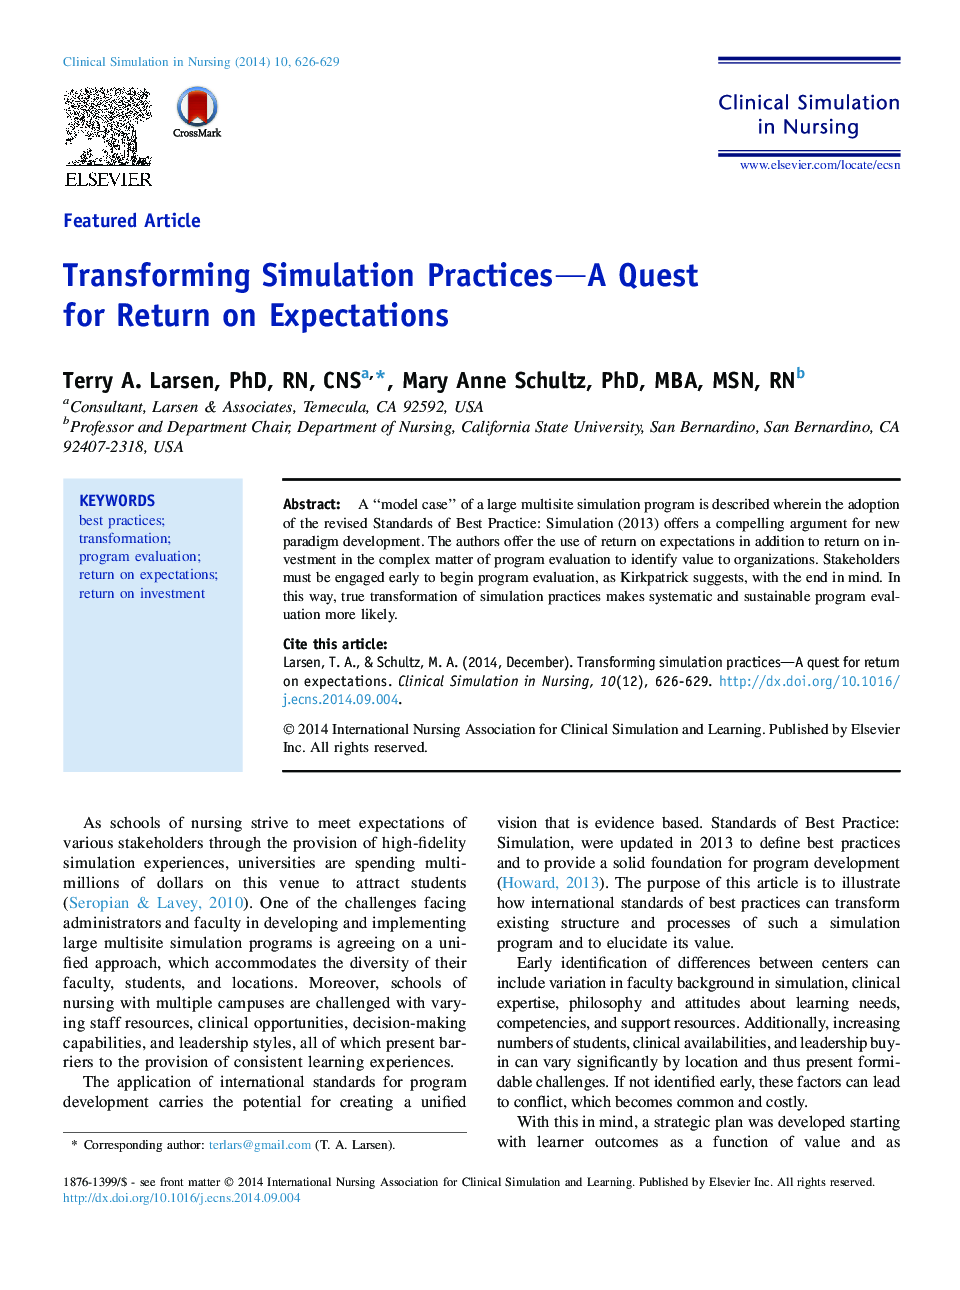 Transforming Simulation Practices—A Quest for Return on Expectations